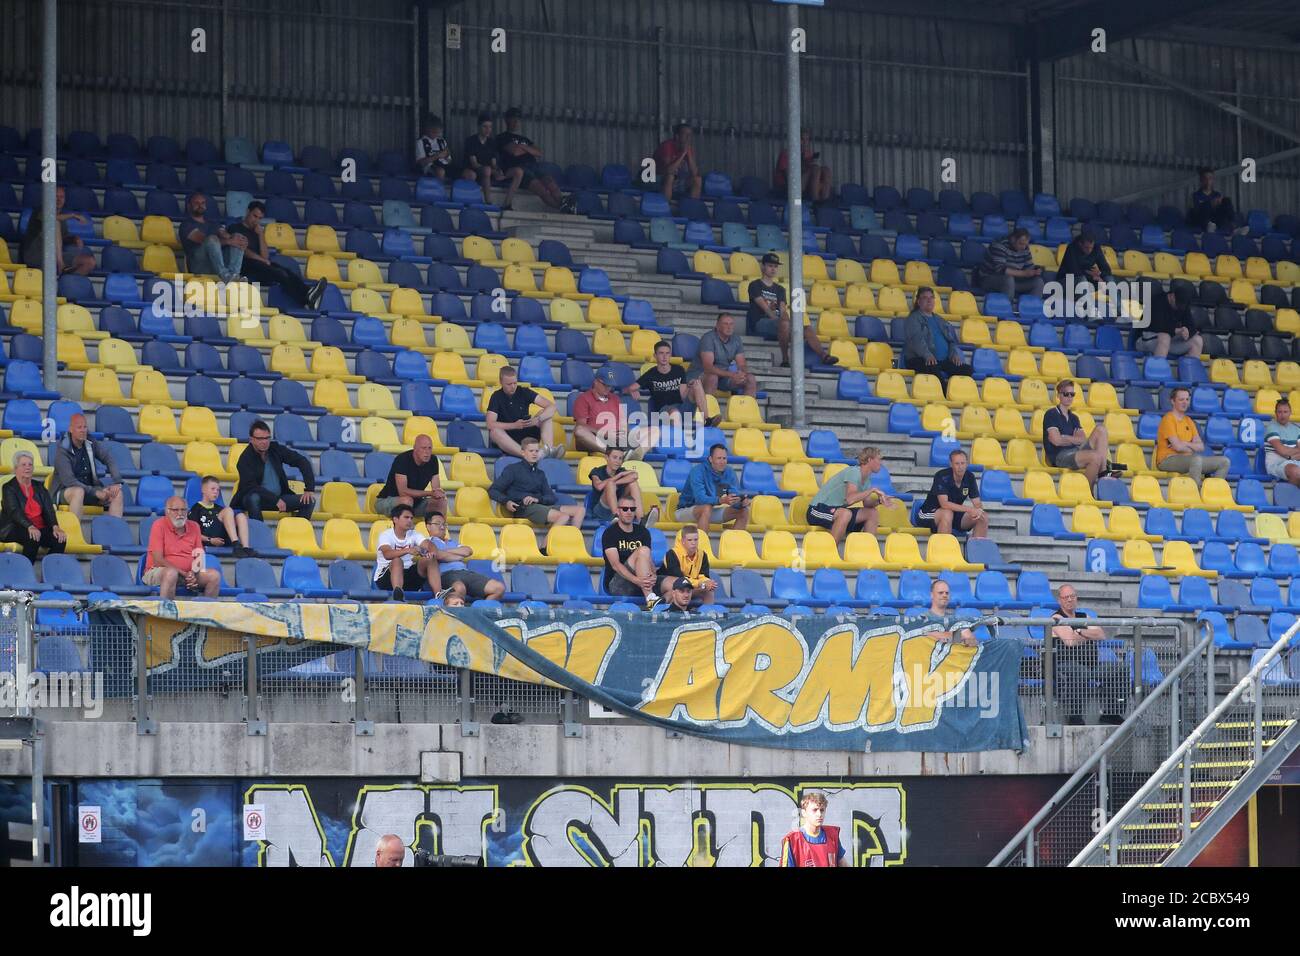 LEEUWARDEN, NETHERLANDS - AUGUST 1: 1, 5m between the spectators seen during the pre season match  SC Cambuur v PEC Zwolle on August 1, 2020 in Leeuwarden, The Netherlands. *** Local Caption *** 1, 5m between the spectators Stock Photo